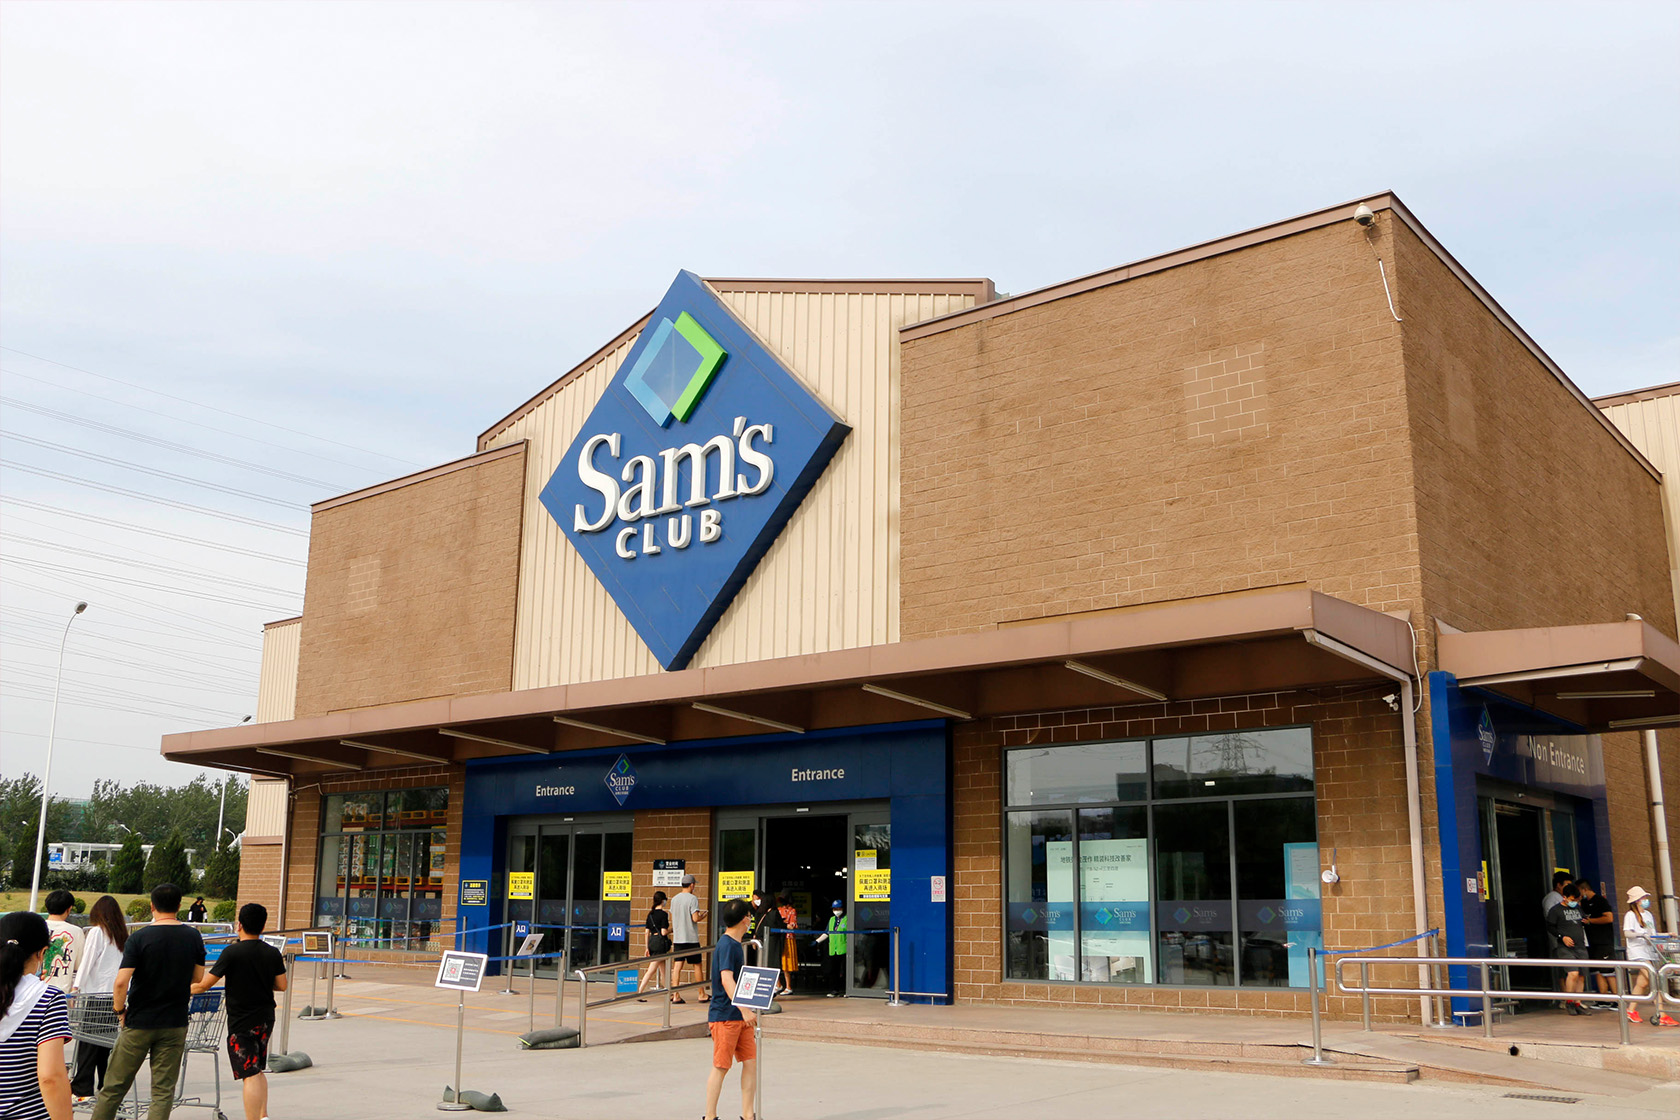 Sam's Club Groupon deal gives you a year for $25 and $25 off your first  order